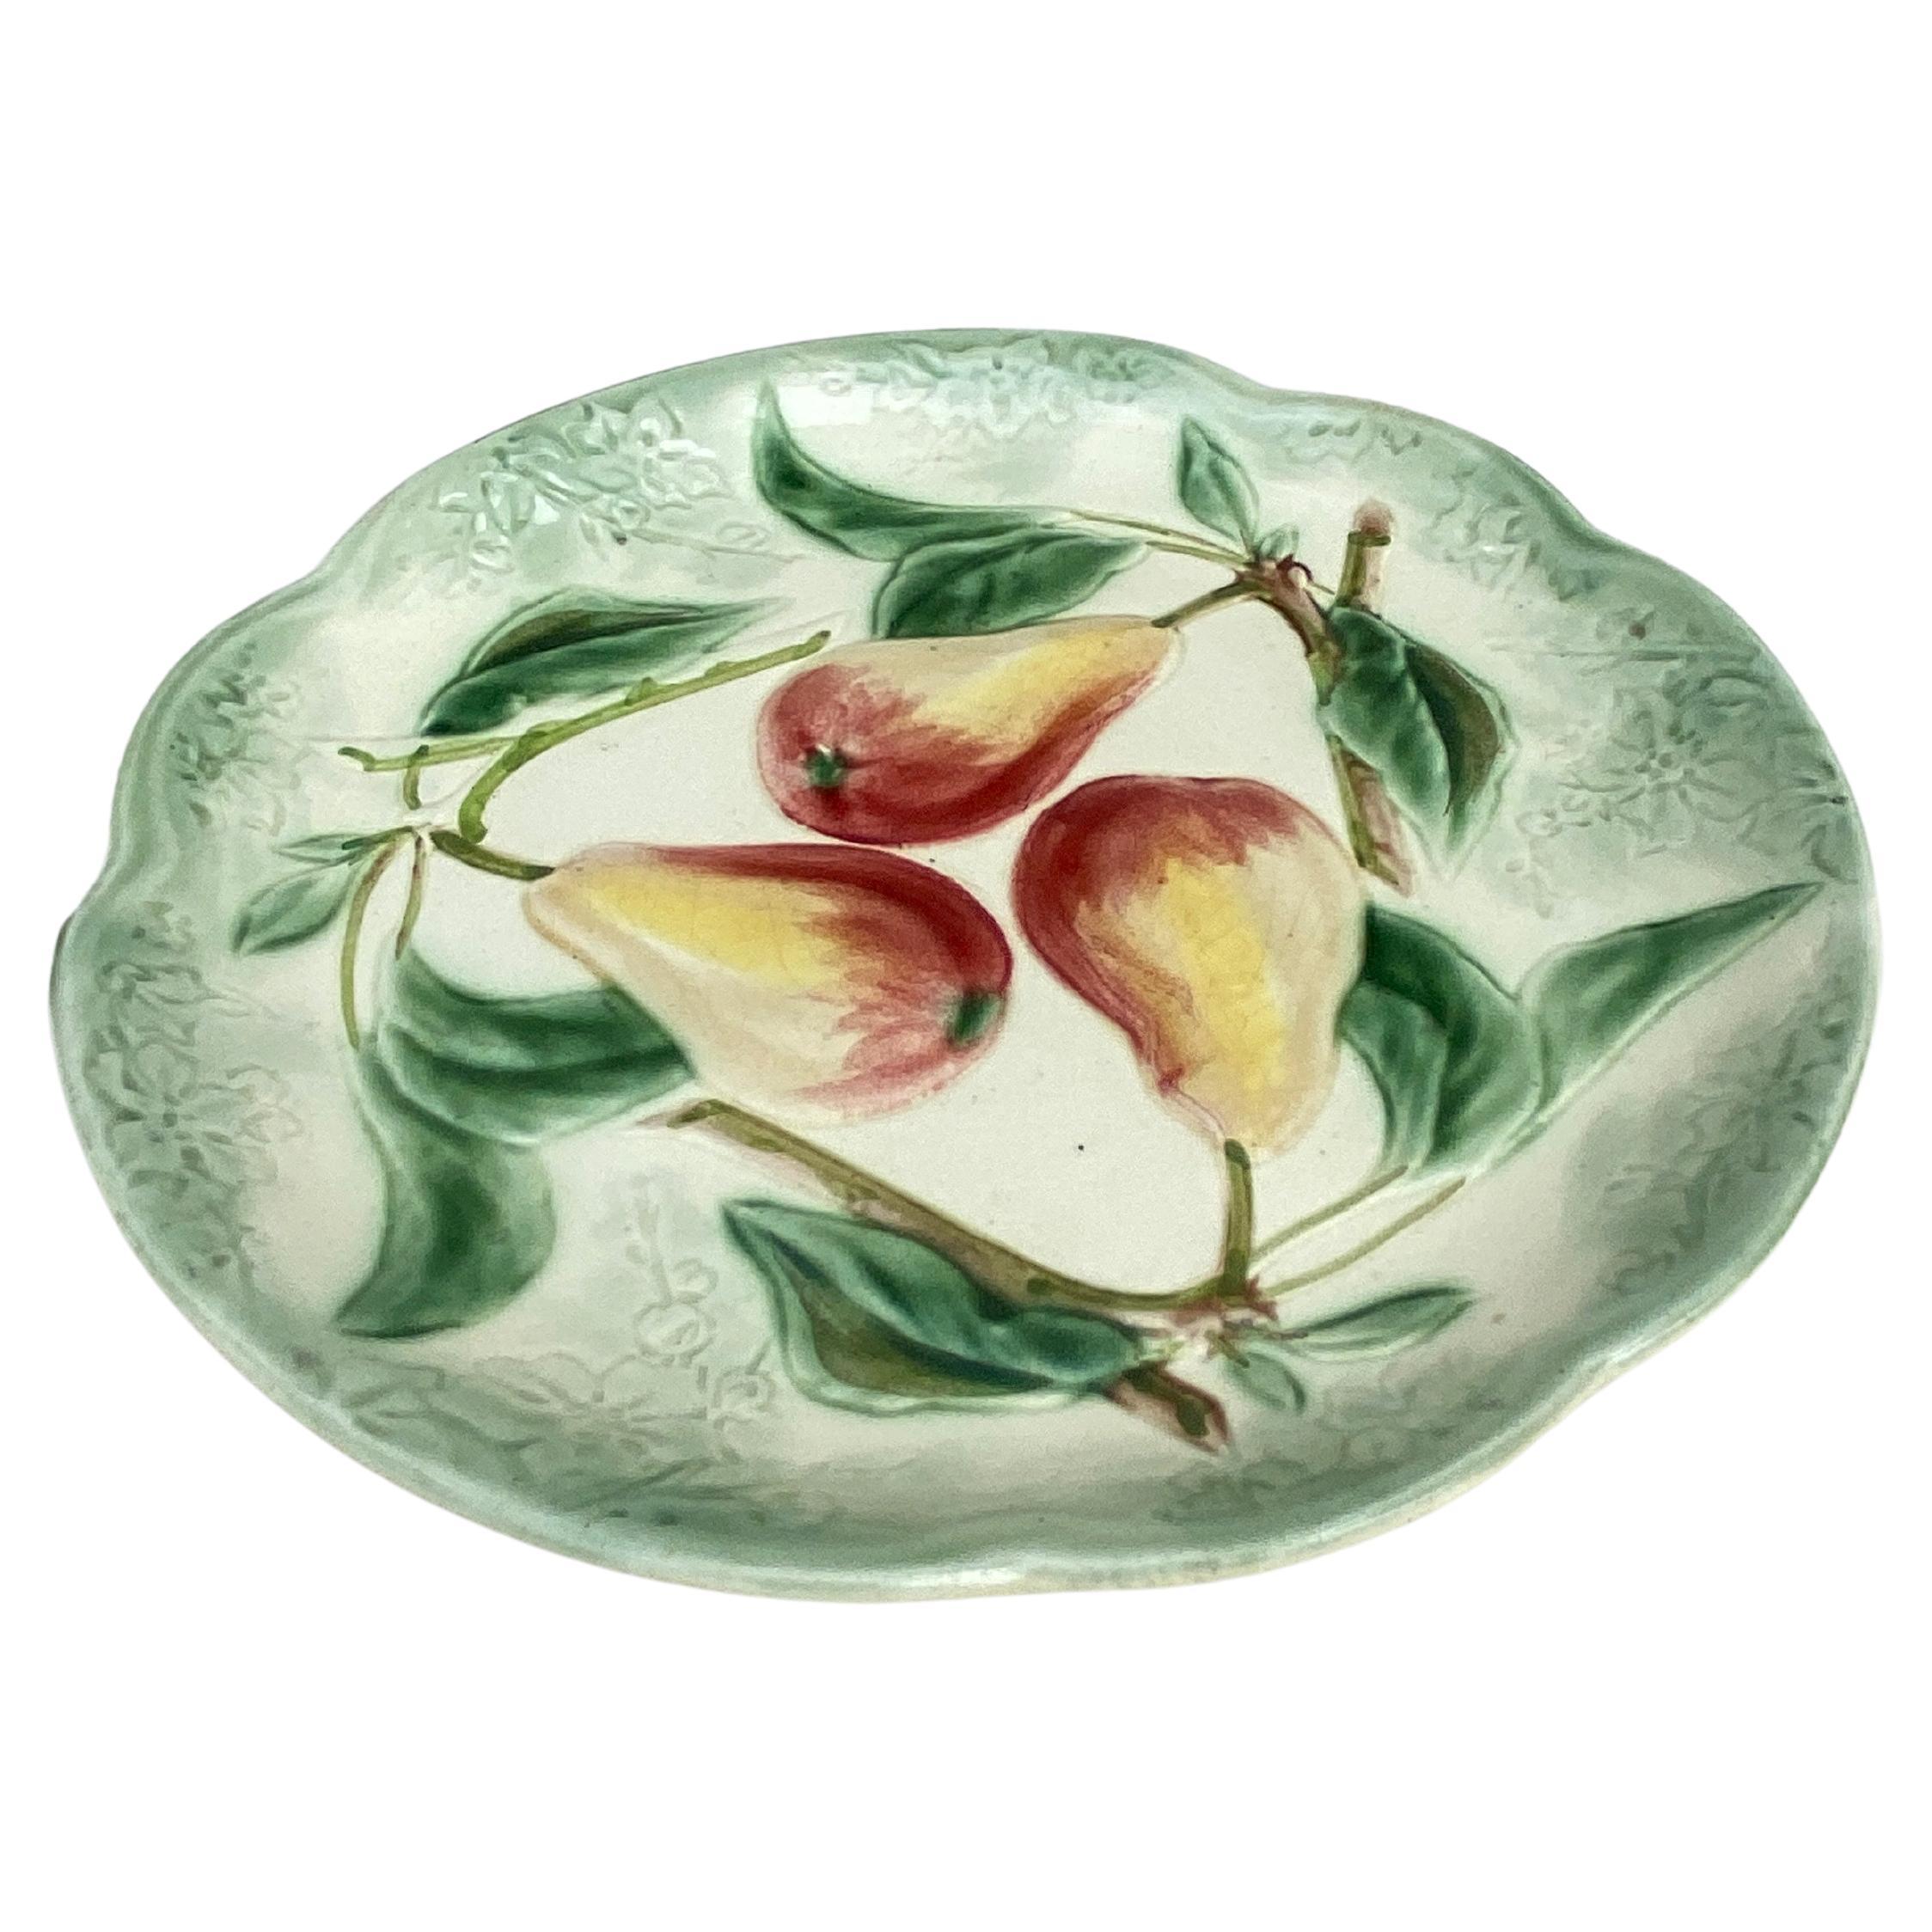 19th Century Majolica pears plate signed Choisy Le Roi.
Made for Higgins & Seiter New York.
The higgins & Seiter Company of New York City began selling decorations for the table, including rich-cut glass in 1887. By 1891 the firm was